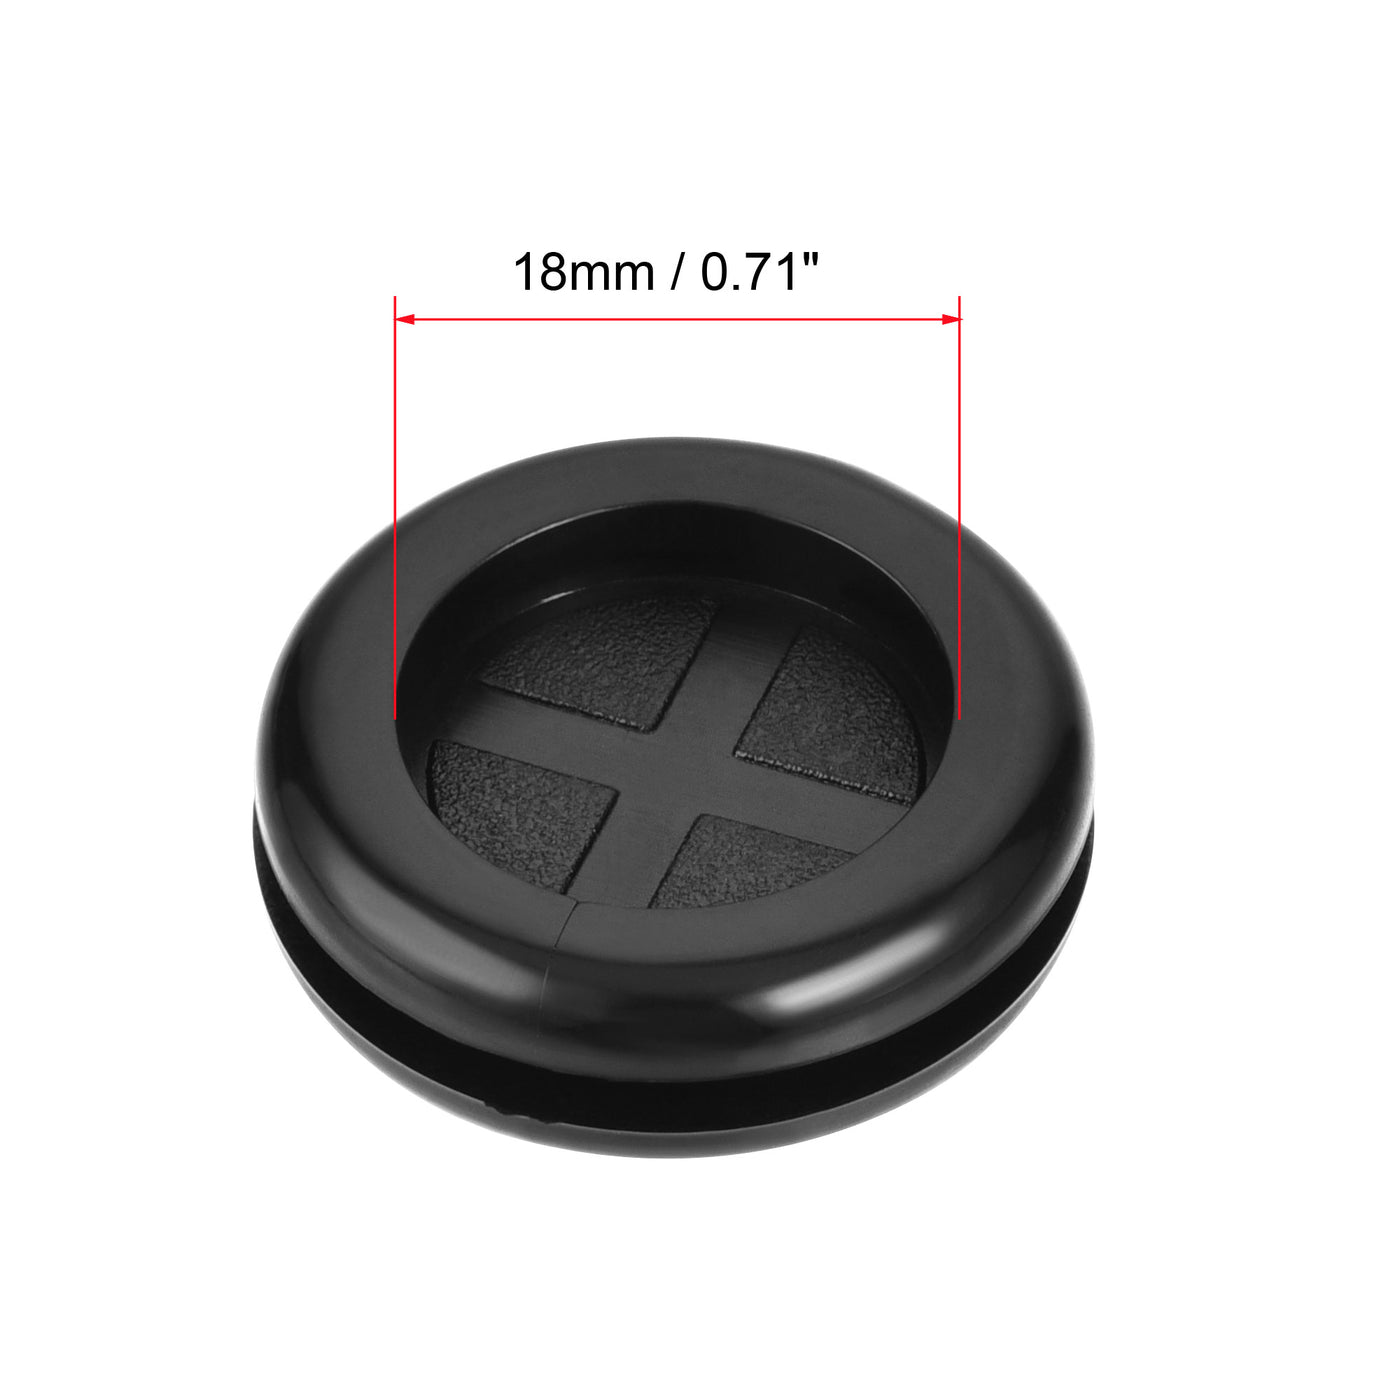 Uxcell Uxcell Rubber Grommet Round Double-Sided Mount Dia 25 mm for Wire Protection 8pcs